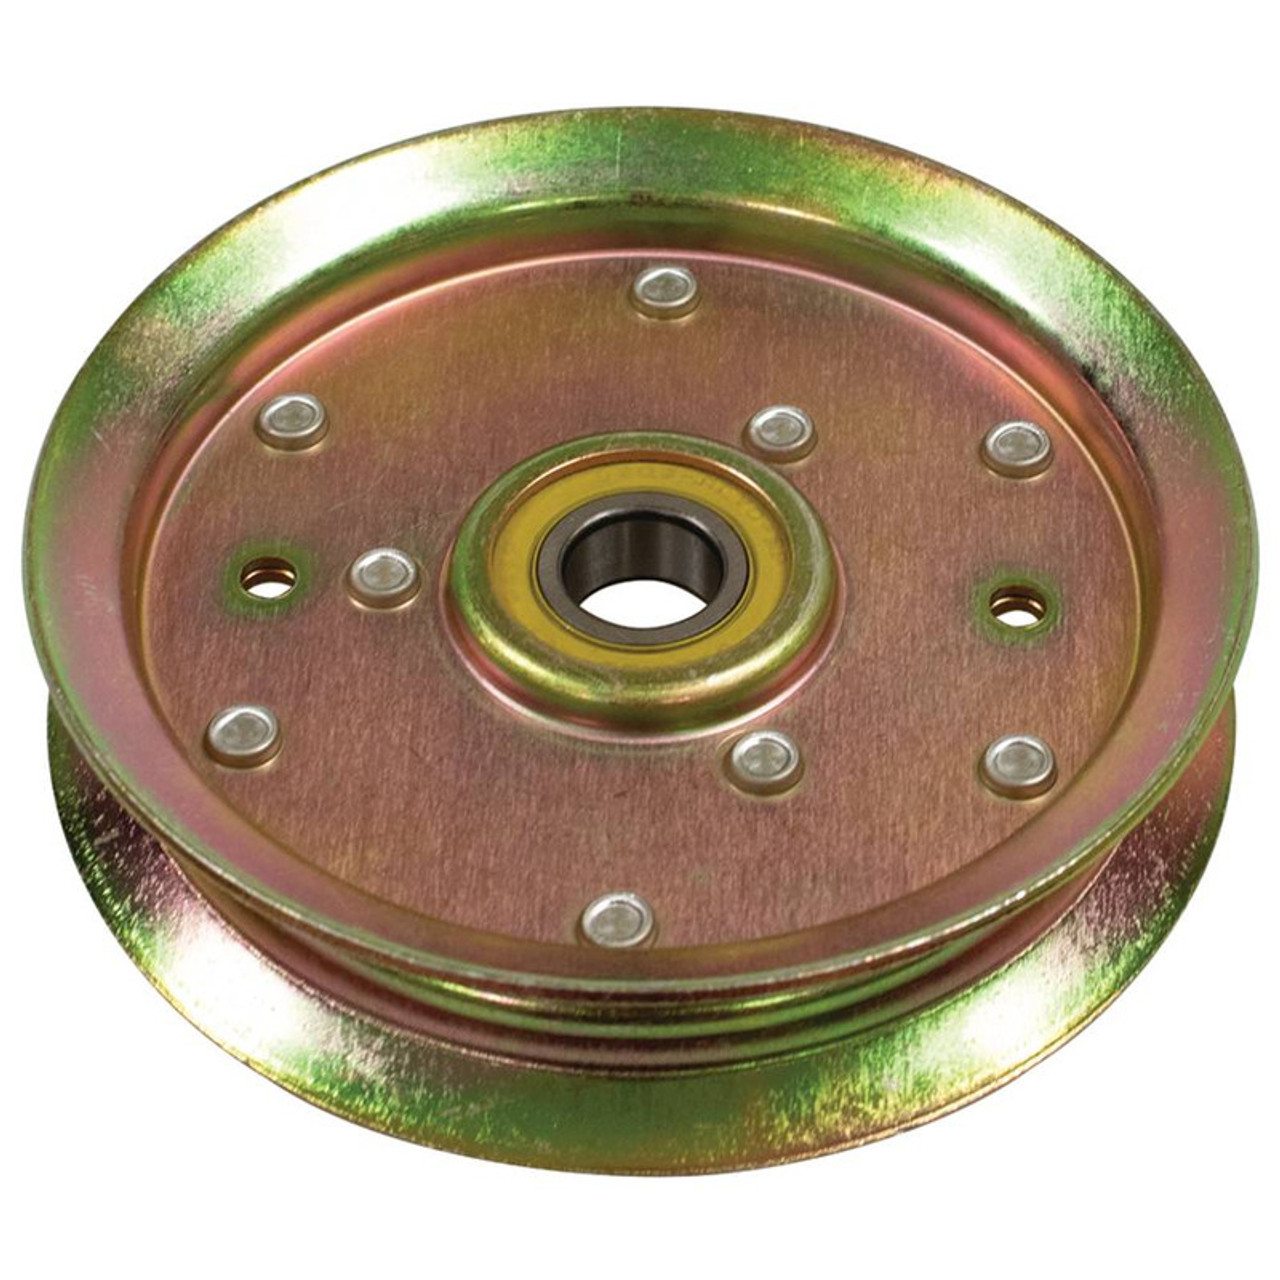 Idler Pulley for John Deere X300 Series, AM135526, OD: 5-1/4", ID: 11/16", Height: 1-1/4"